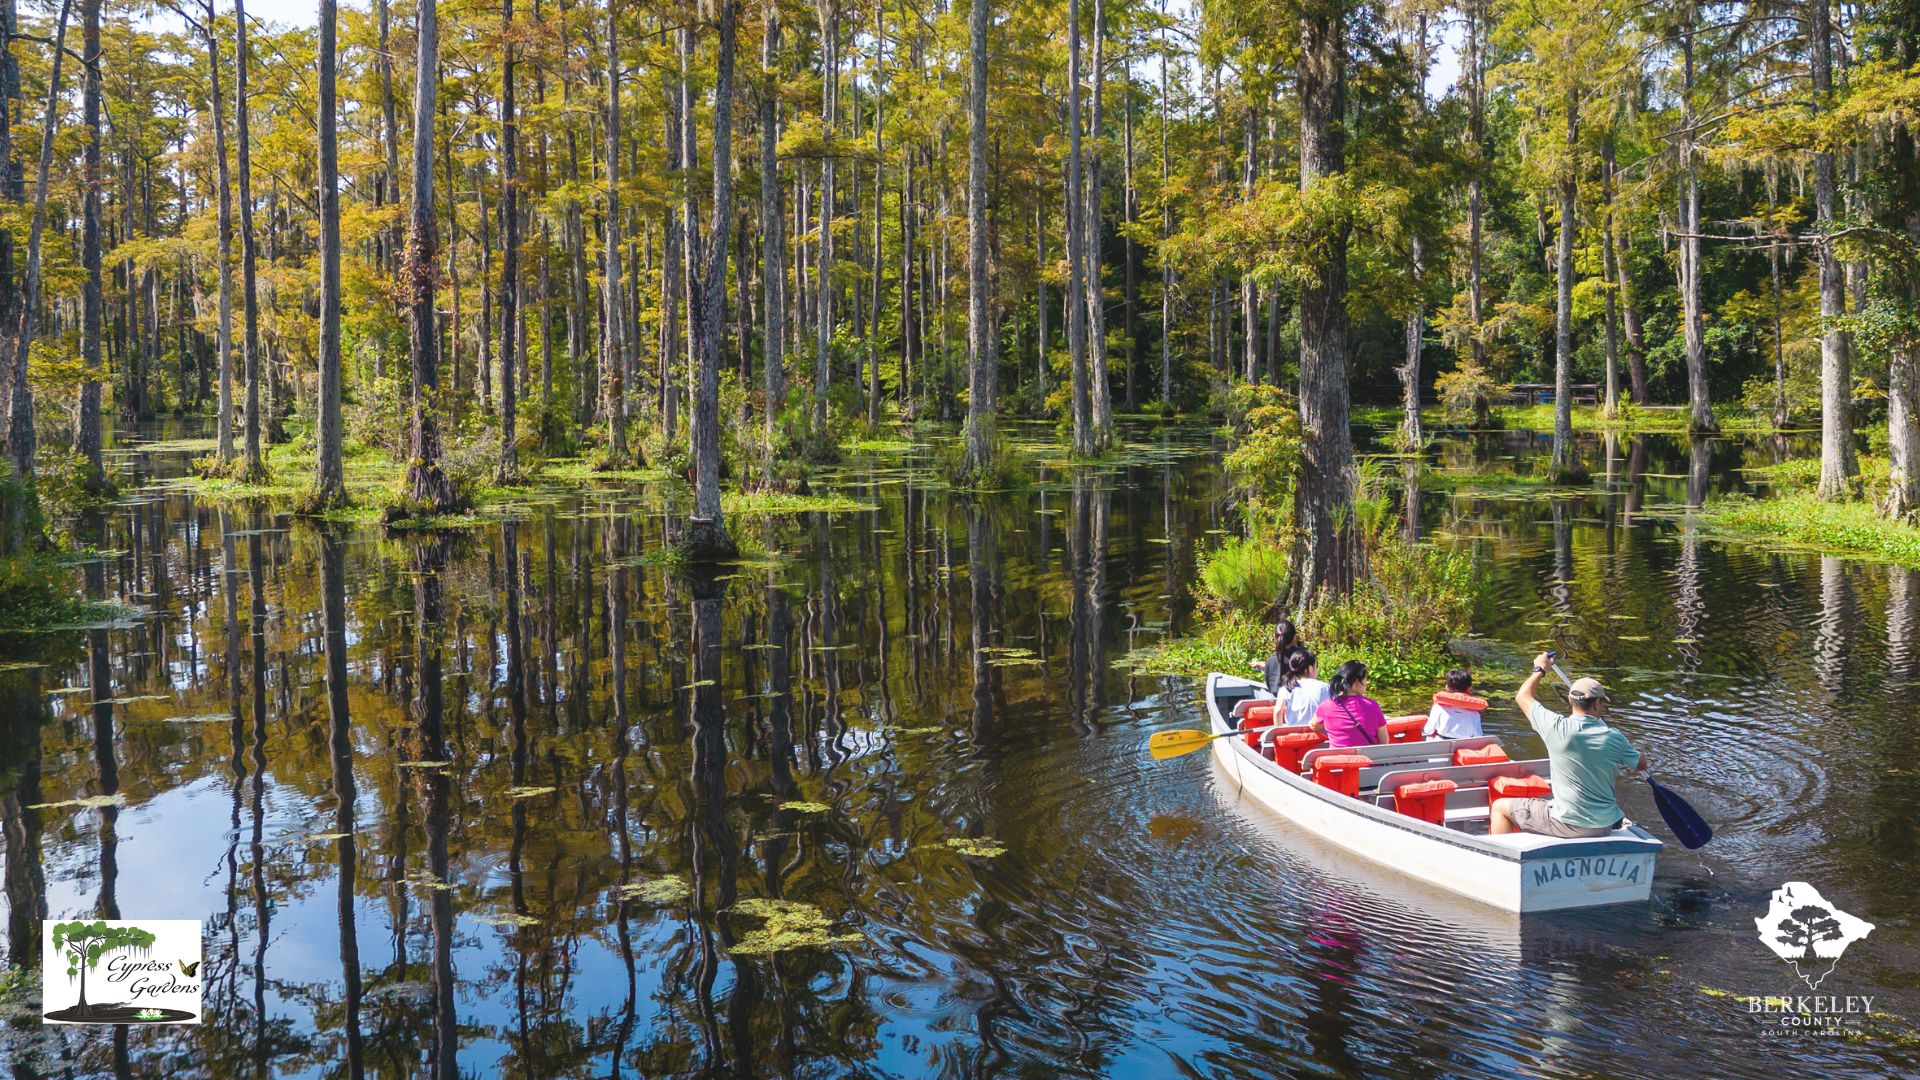 Cypress Gardens Boasts Record Number of Visitors Over the Last Year